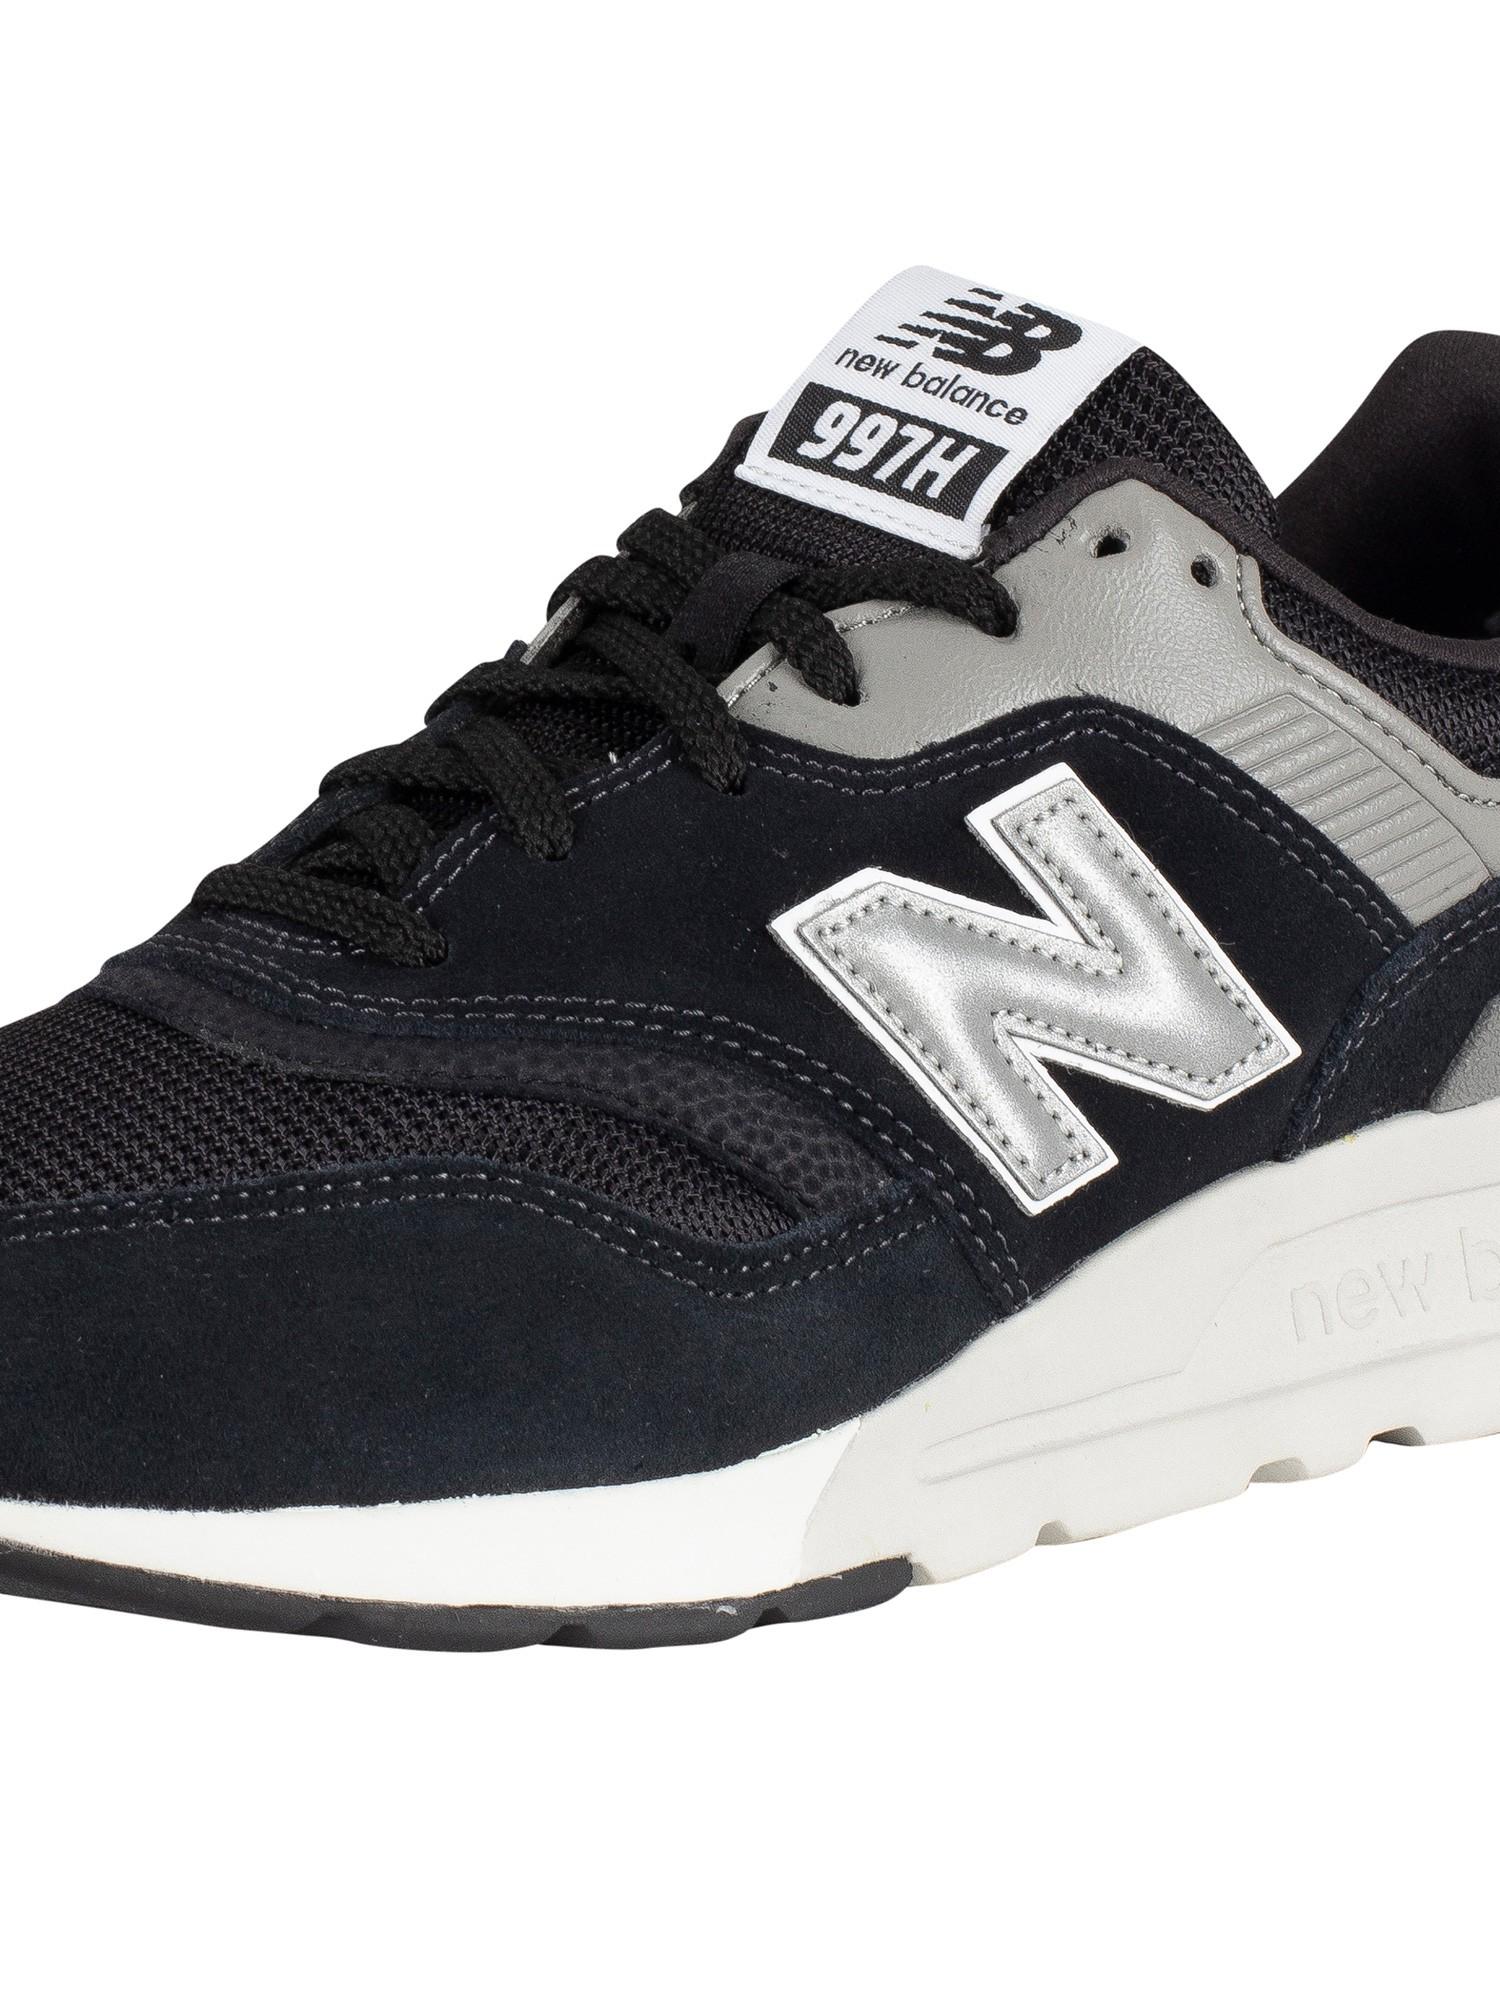 New Balance 977 Suede Trainers in Black/Silver/Grey (Black) for ...